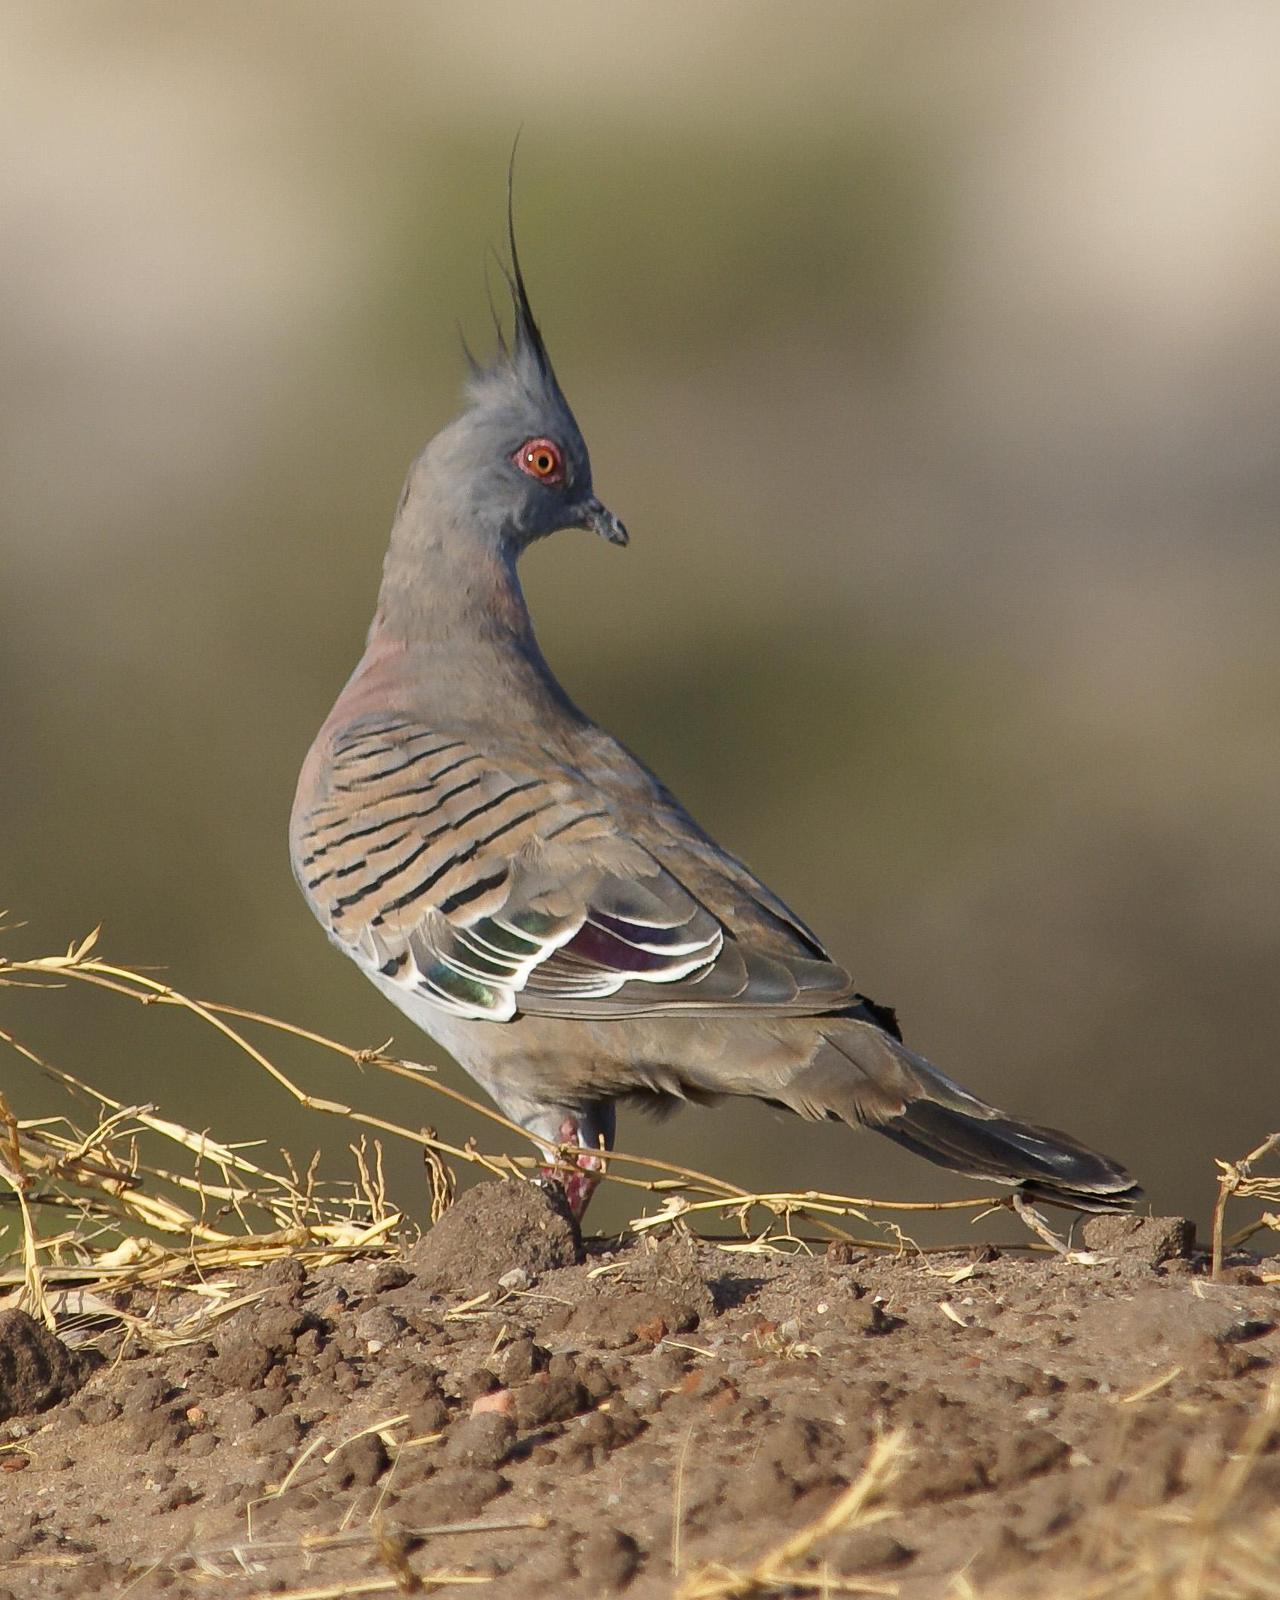 Crested Pigeon Photo by Steve Percival